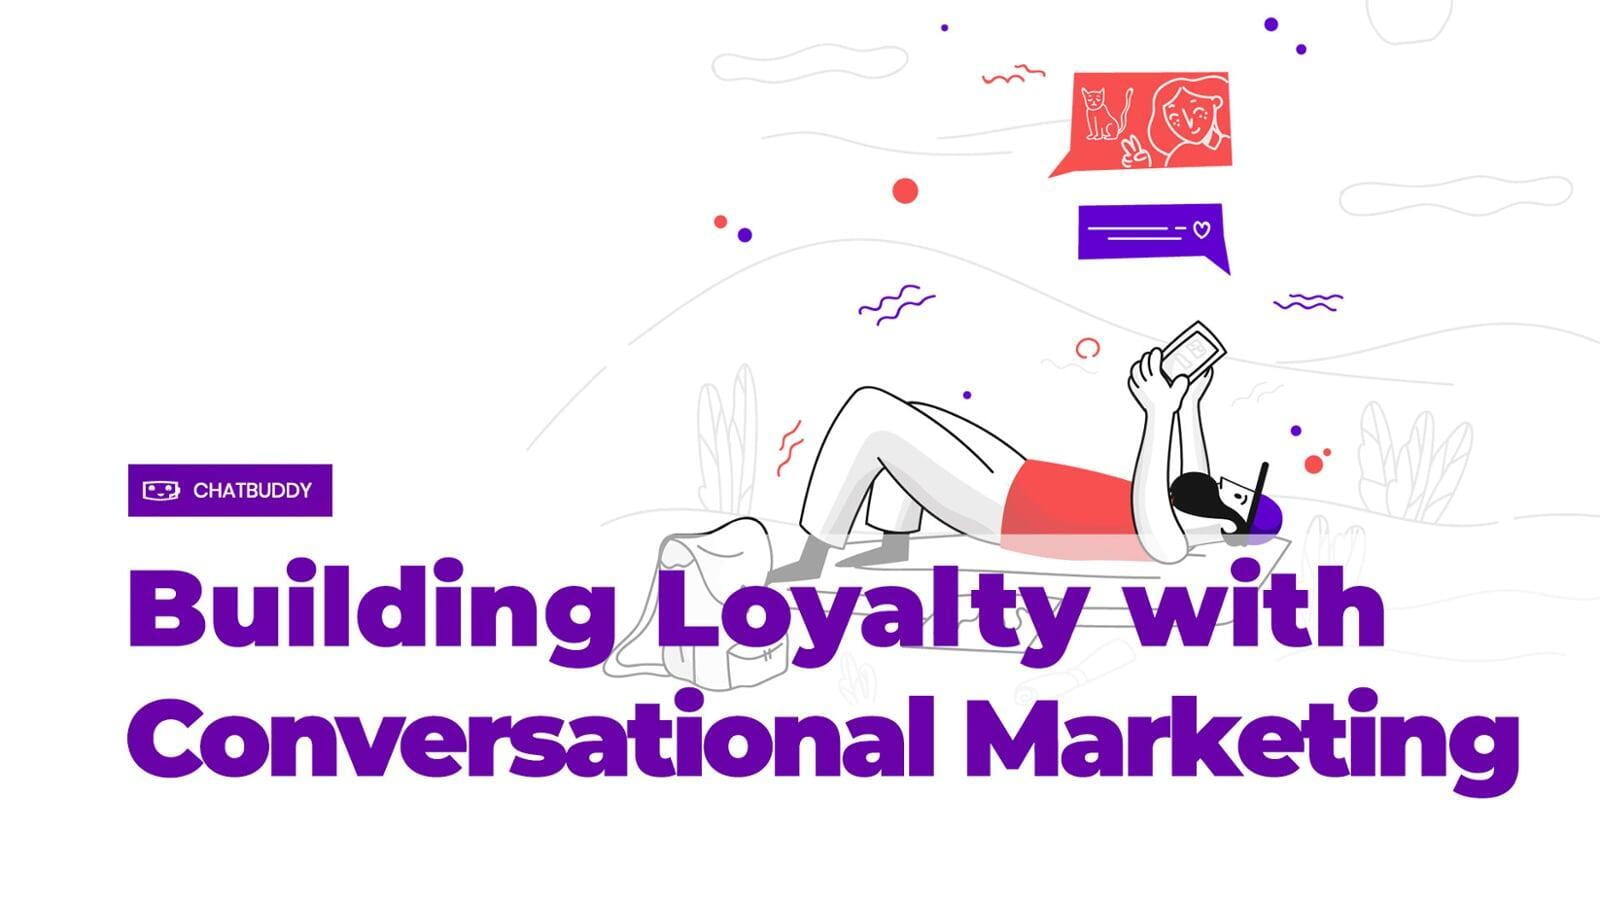 Building Loyalty with Conversational Marketing